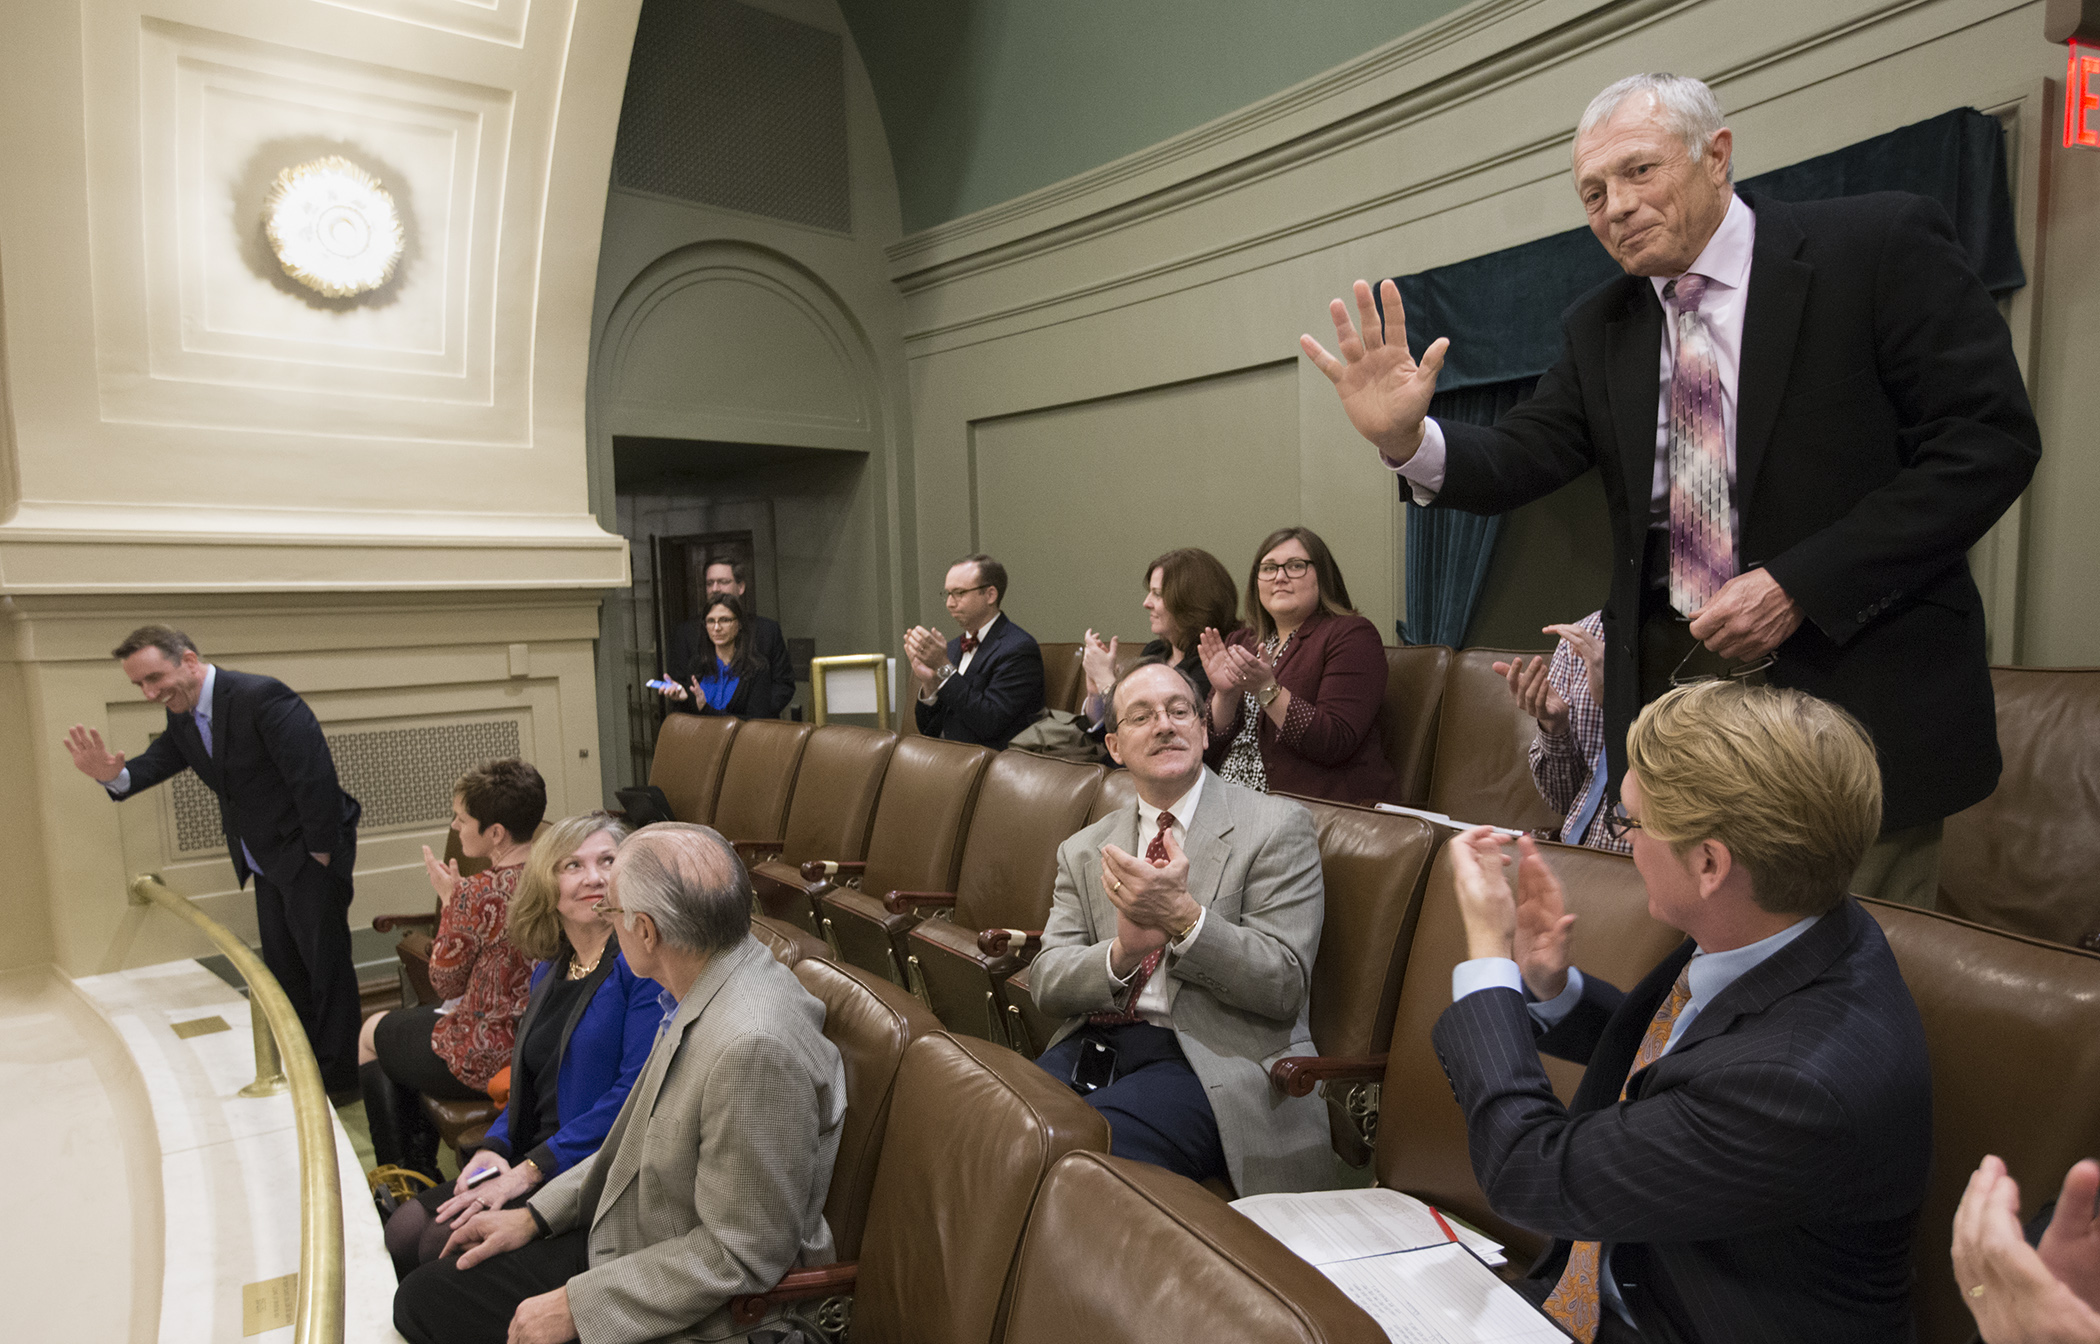 Former House Speaker Steve Sviggum, standing right, and Darrin Rosha, far left, wave from the House Gallery after being elected to the University of Minnesota Board of Regents Feb. 22. Photo by Paul Battaglia